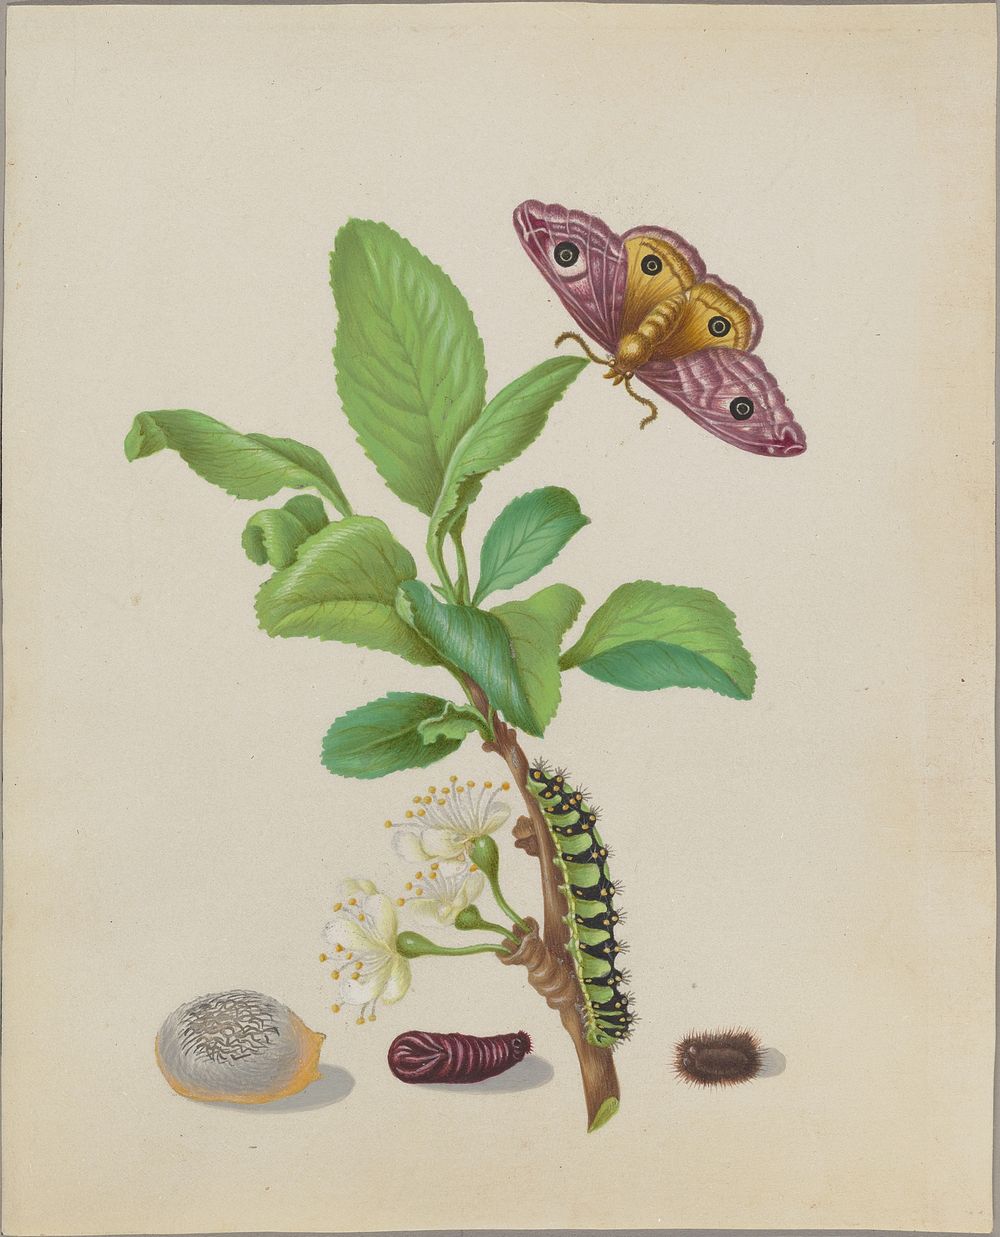 Metamorphosis of a Small Emperor Moth on a Damson Plum, plate 13 of the Caterpillar Book by Maria Sibylla Merian